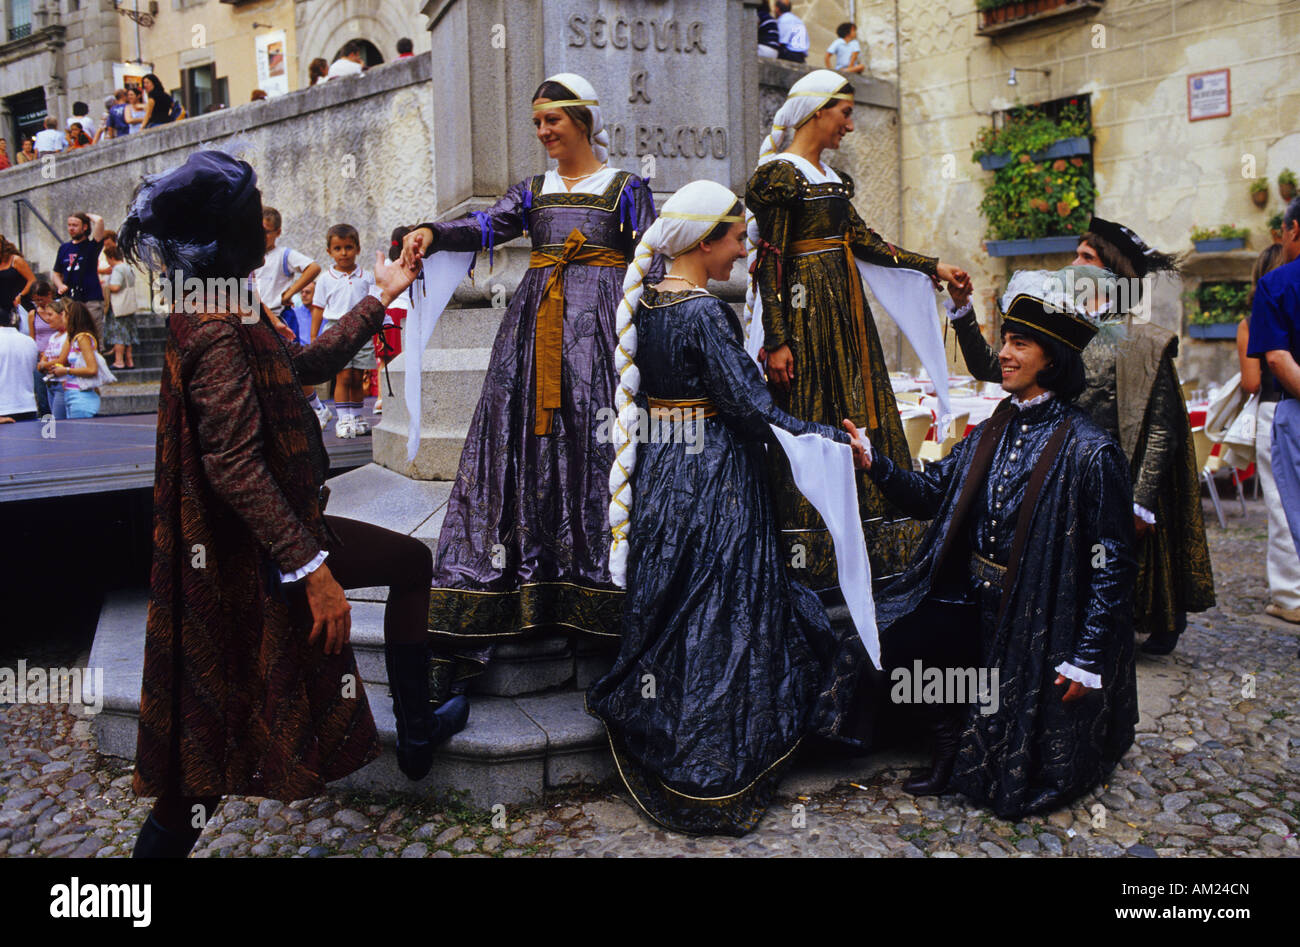 Dance in the Coronation of Isabella I of Castile MIDDLE AGES FESTIVAL in SEGOVIA Spain Stock Photo